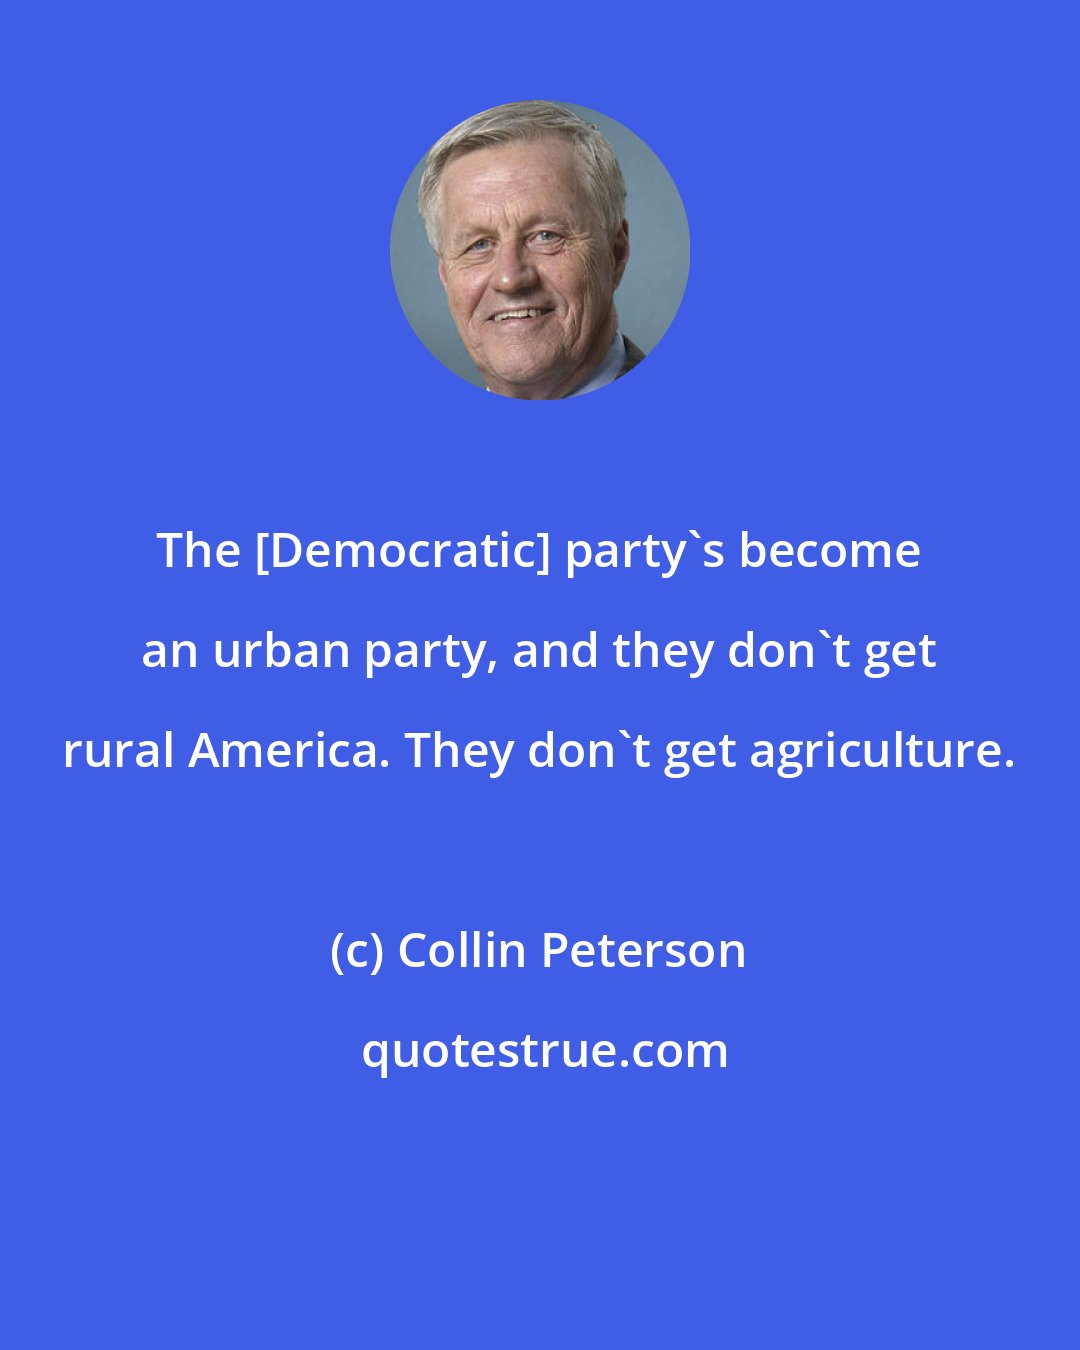 Collin Peterson: The [Democratic] party's become an urban party, and they don't get rural America. They don't get agriculture.